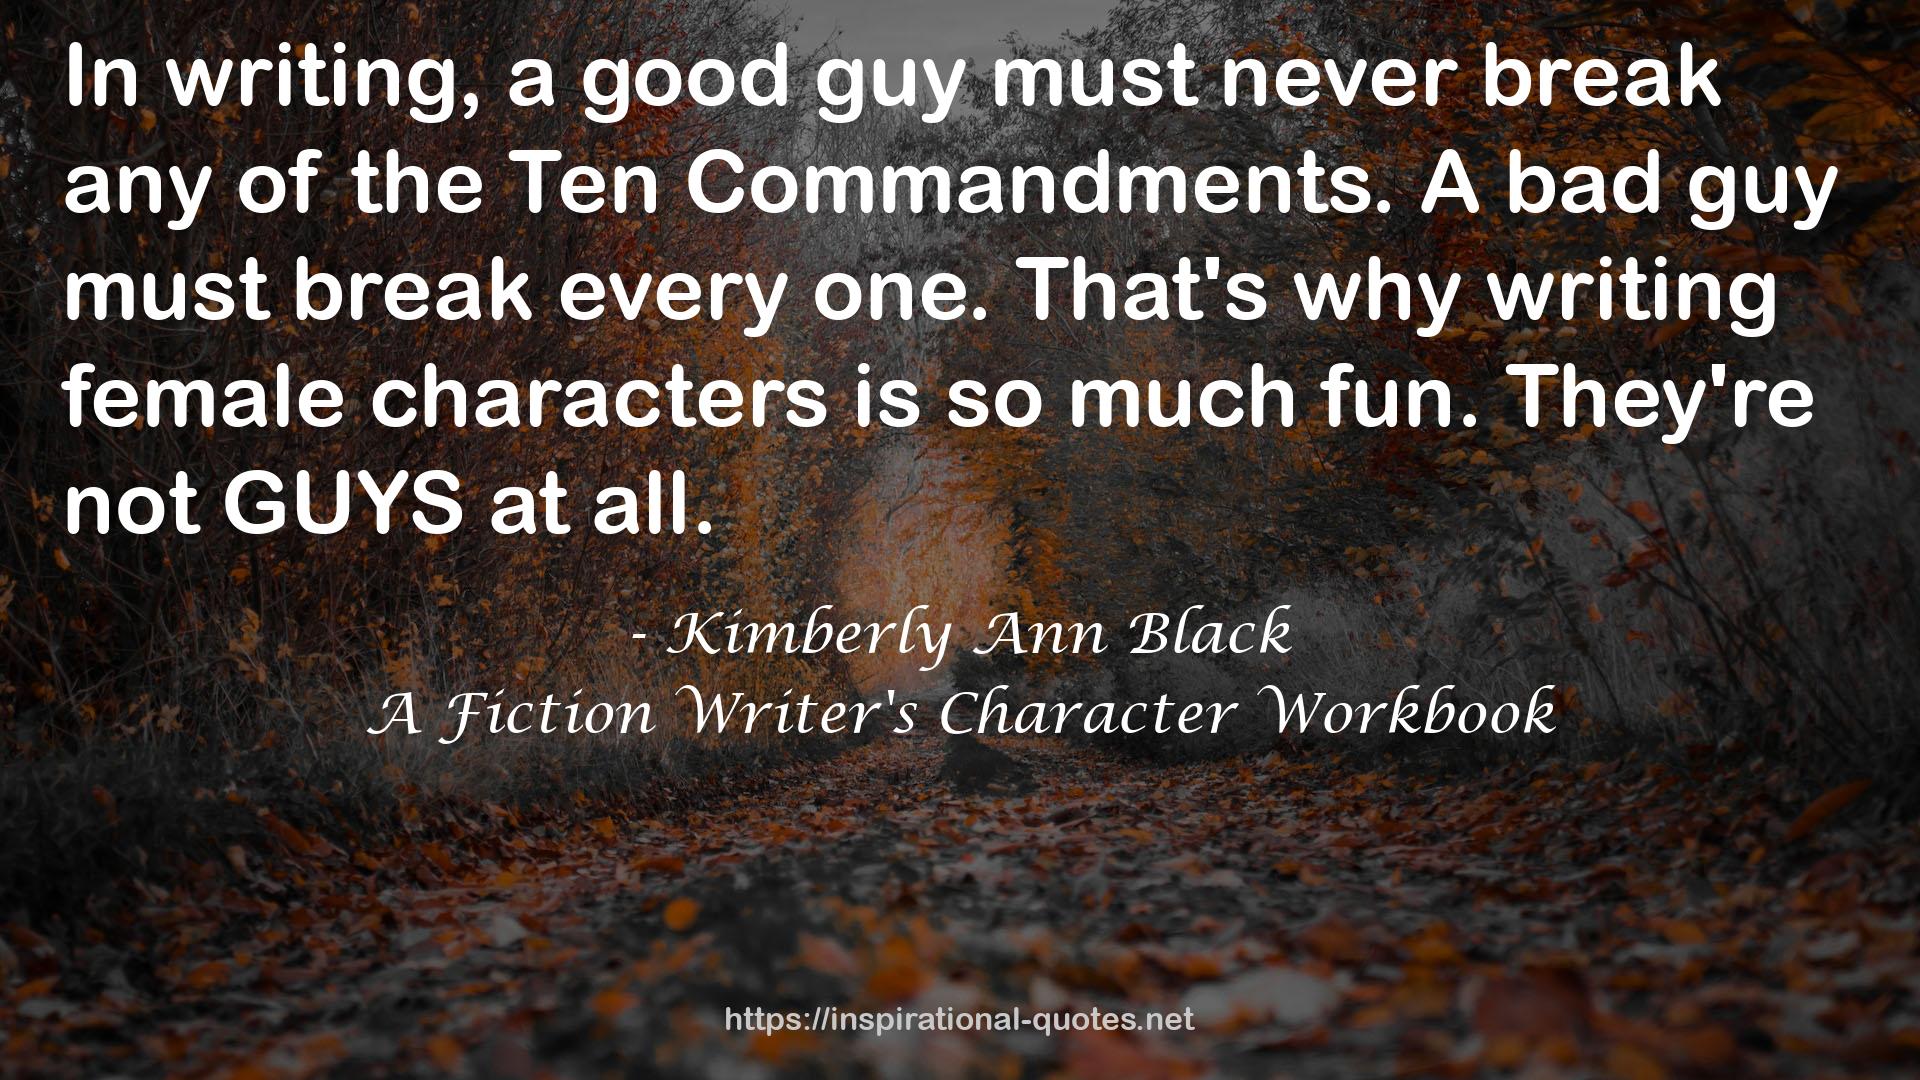 A Fiction Writer's Character Workbook QUOTES